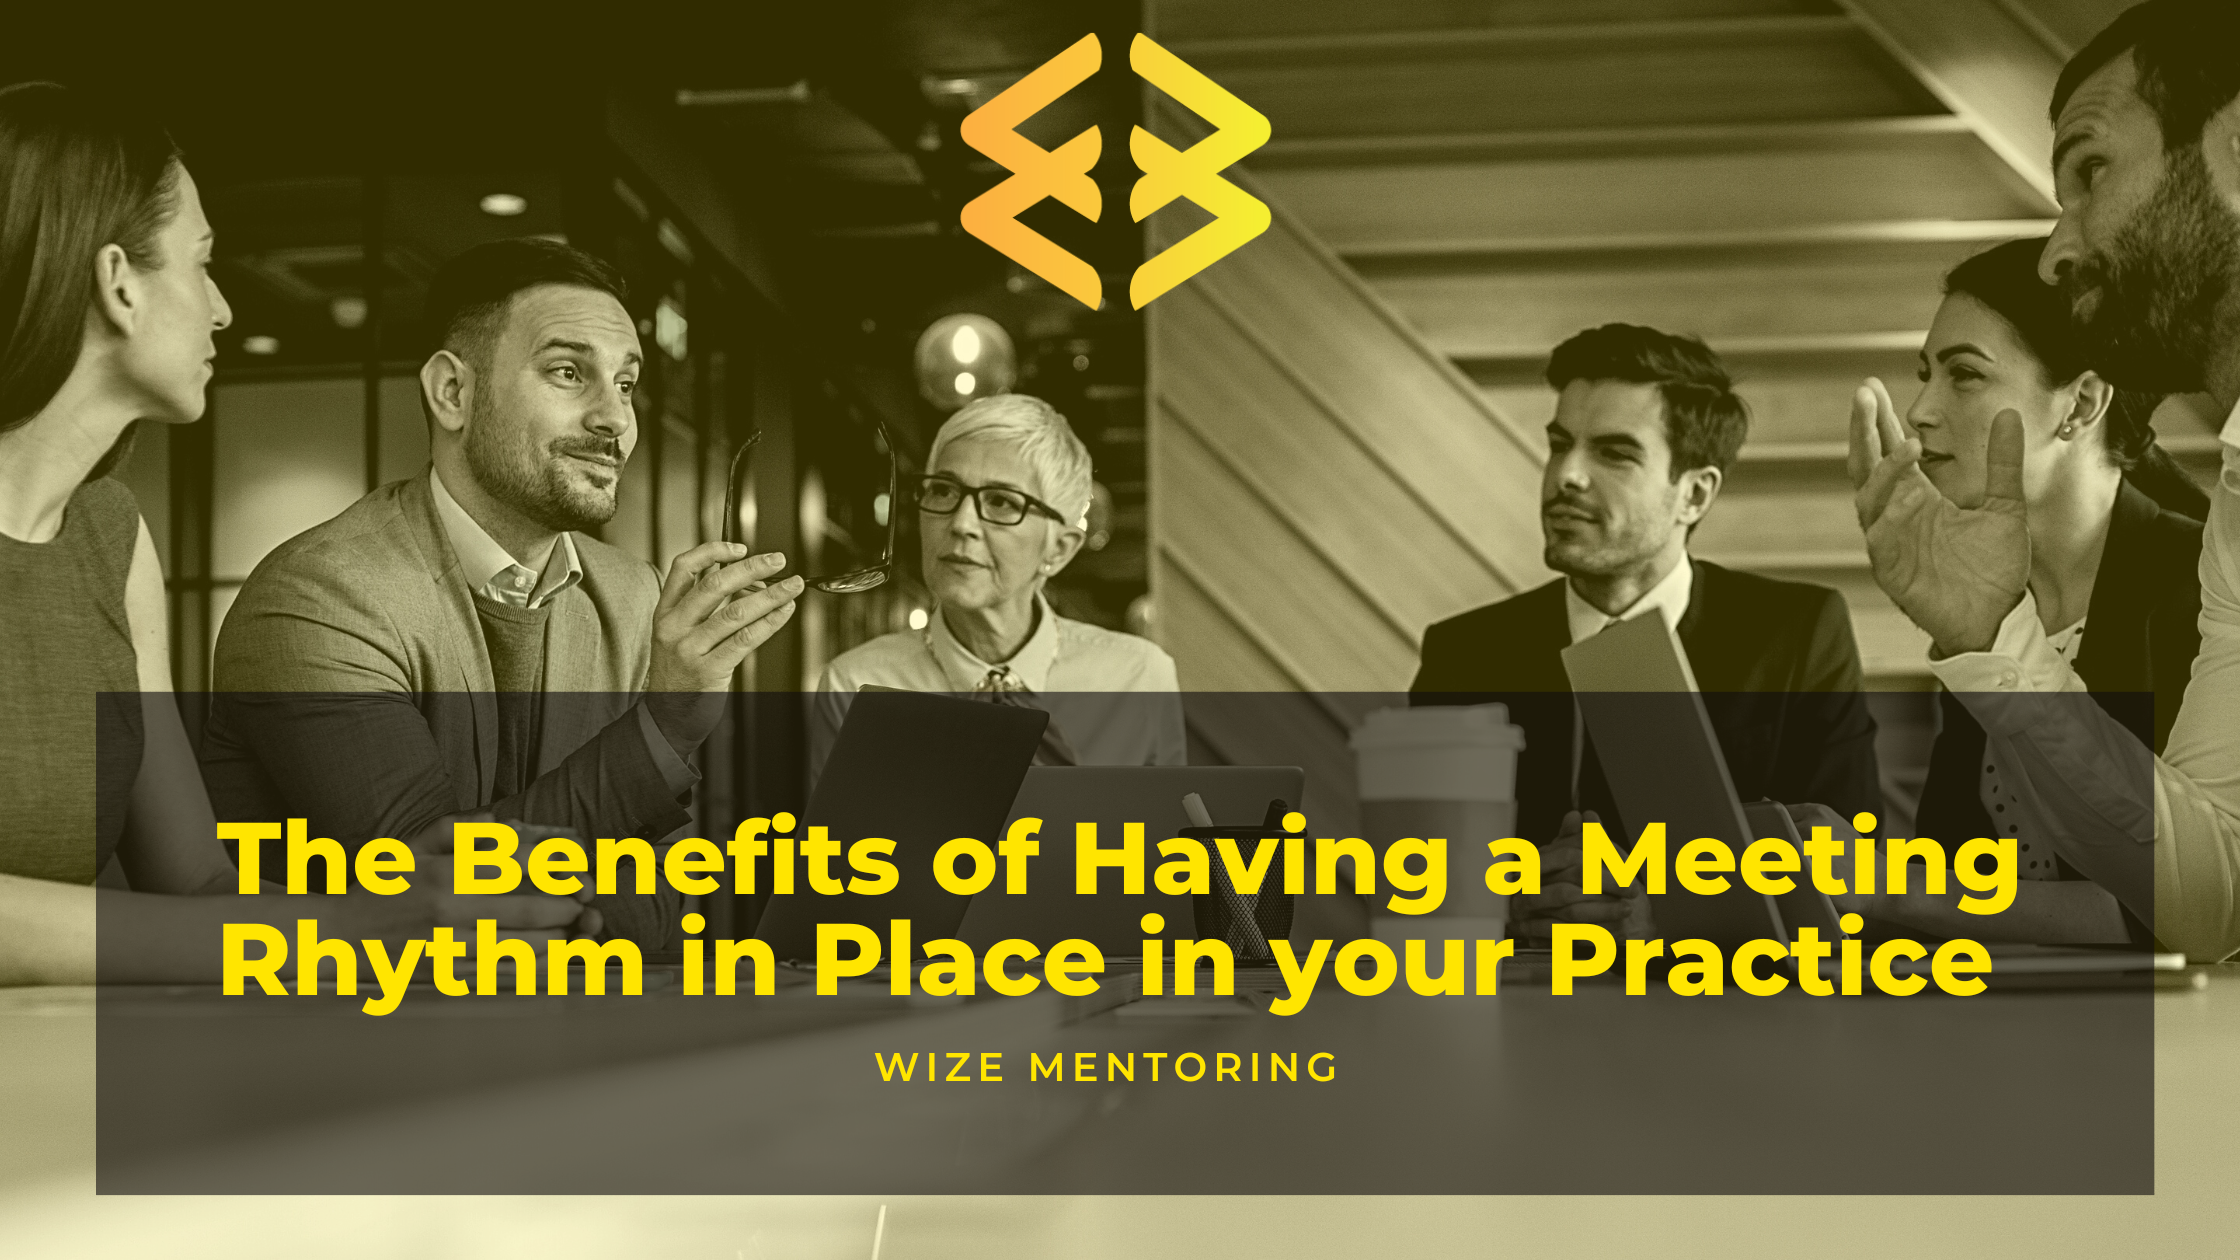 The Benefits of Having a Meeting Rhythm in Place in your Practice